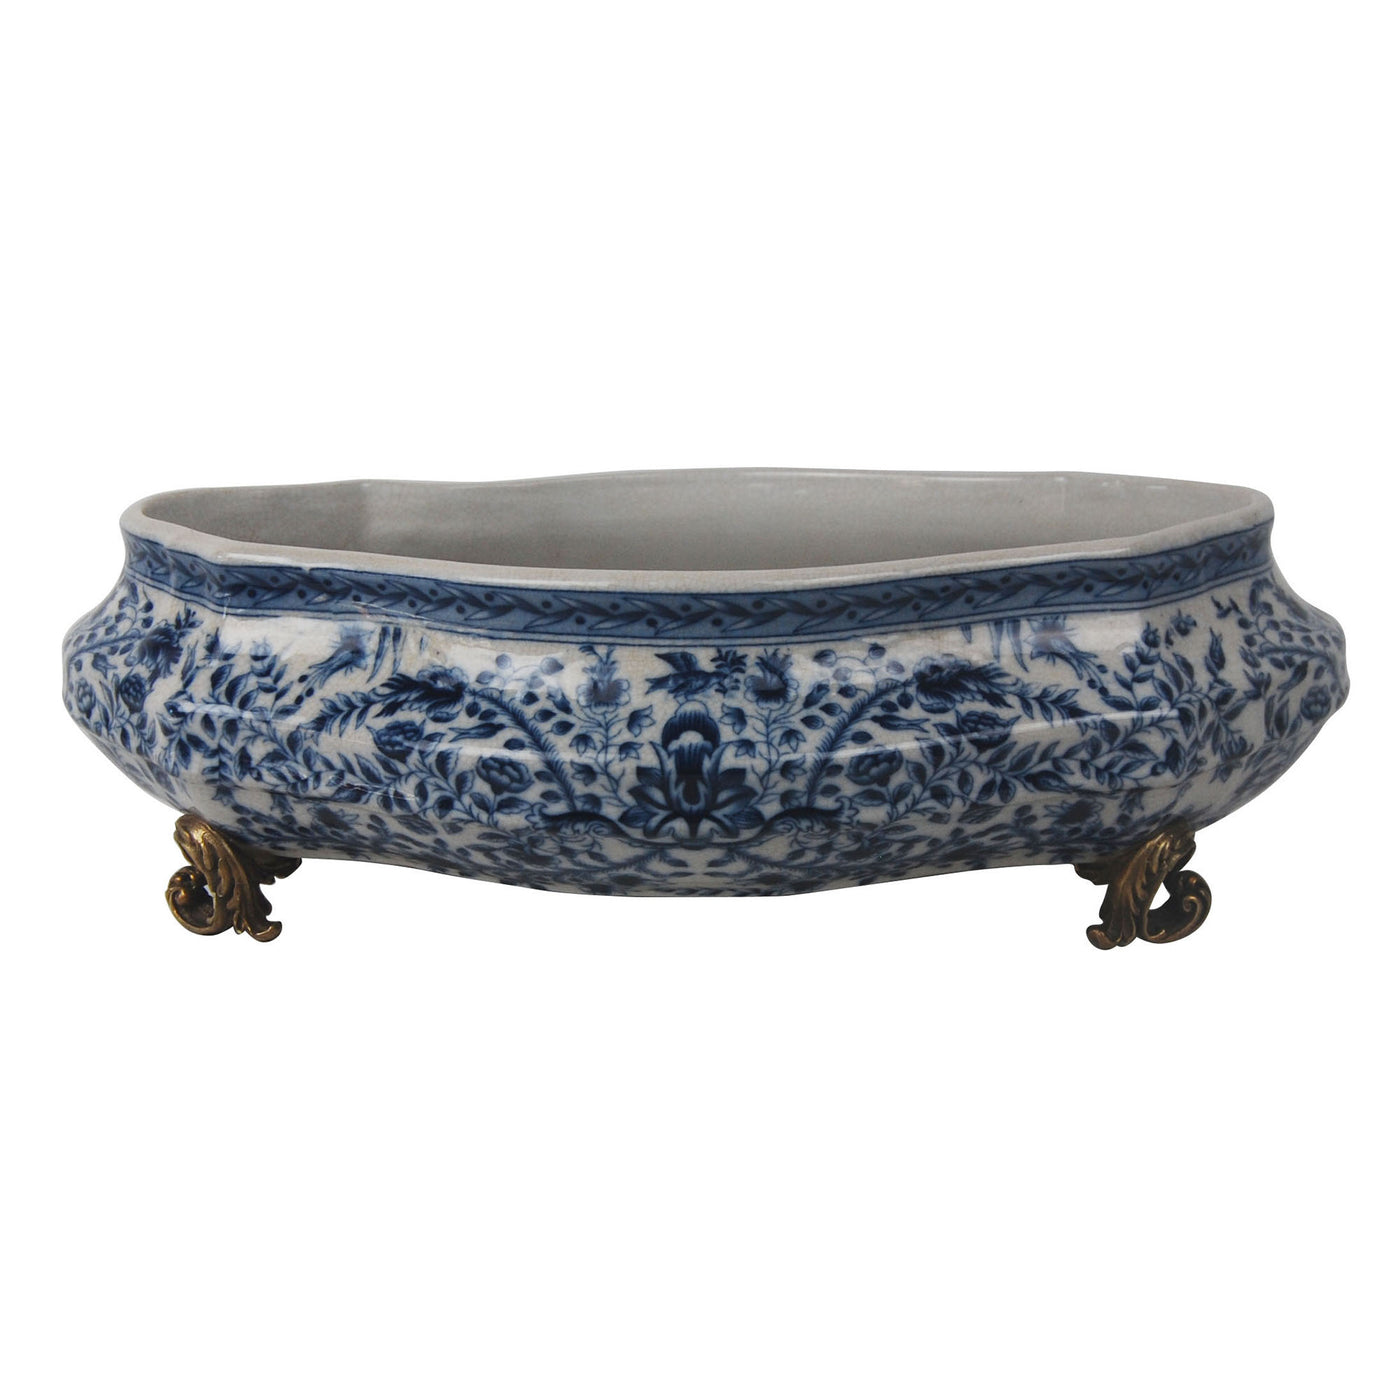 classic blue and white low profile oval planter with bronze feet